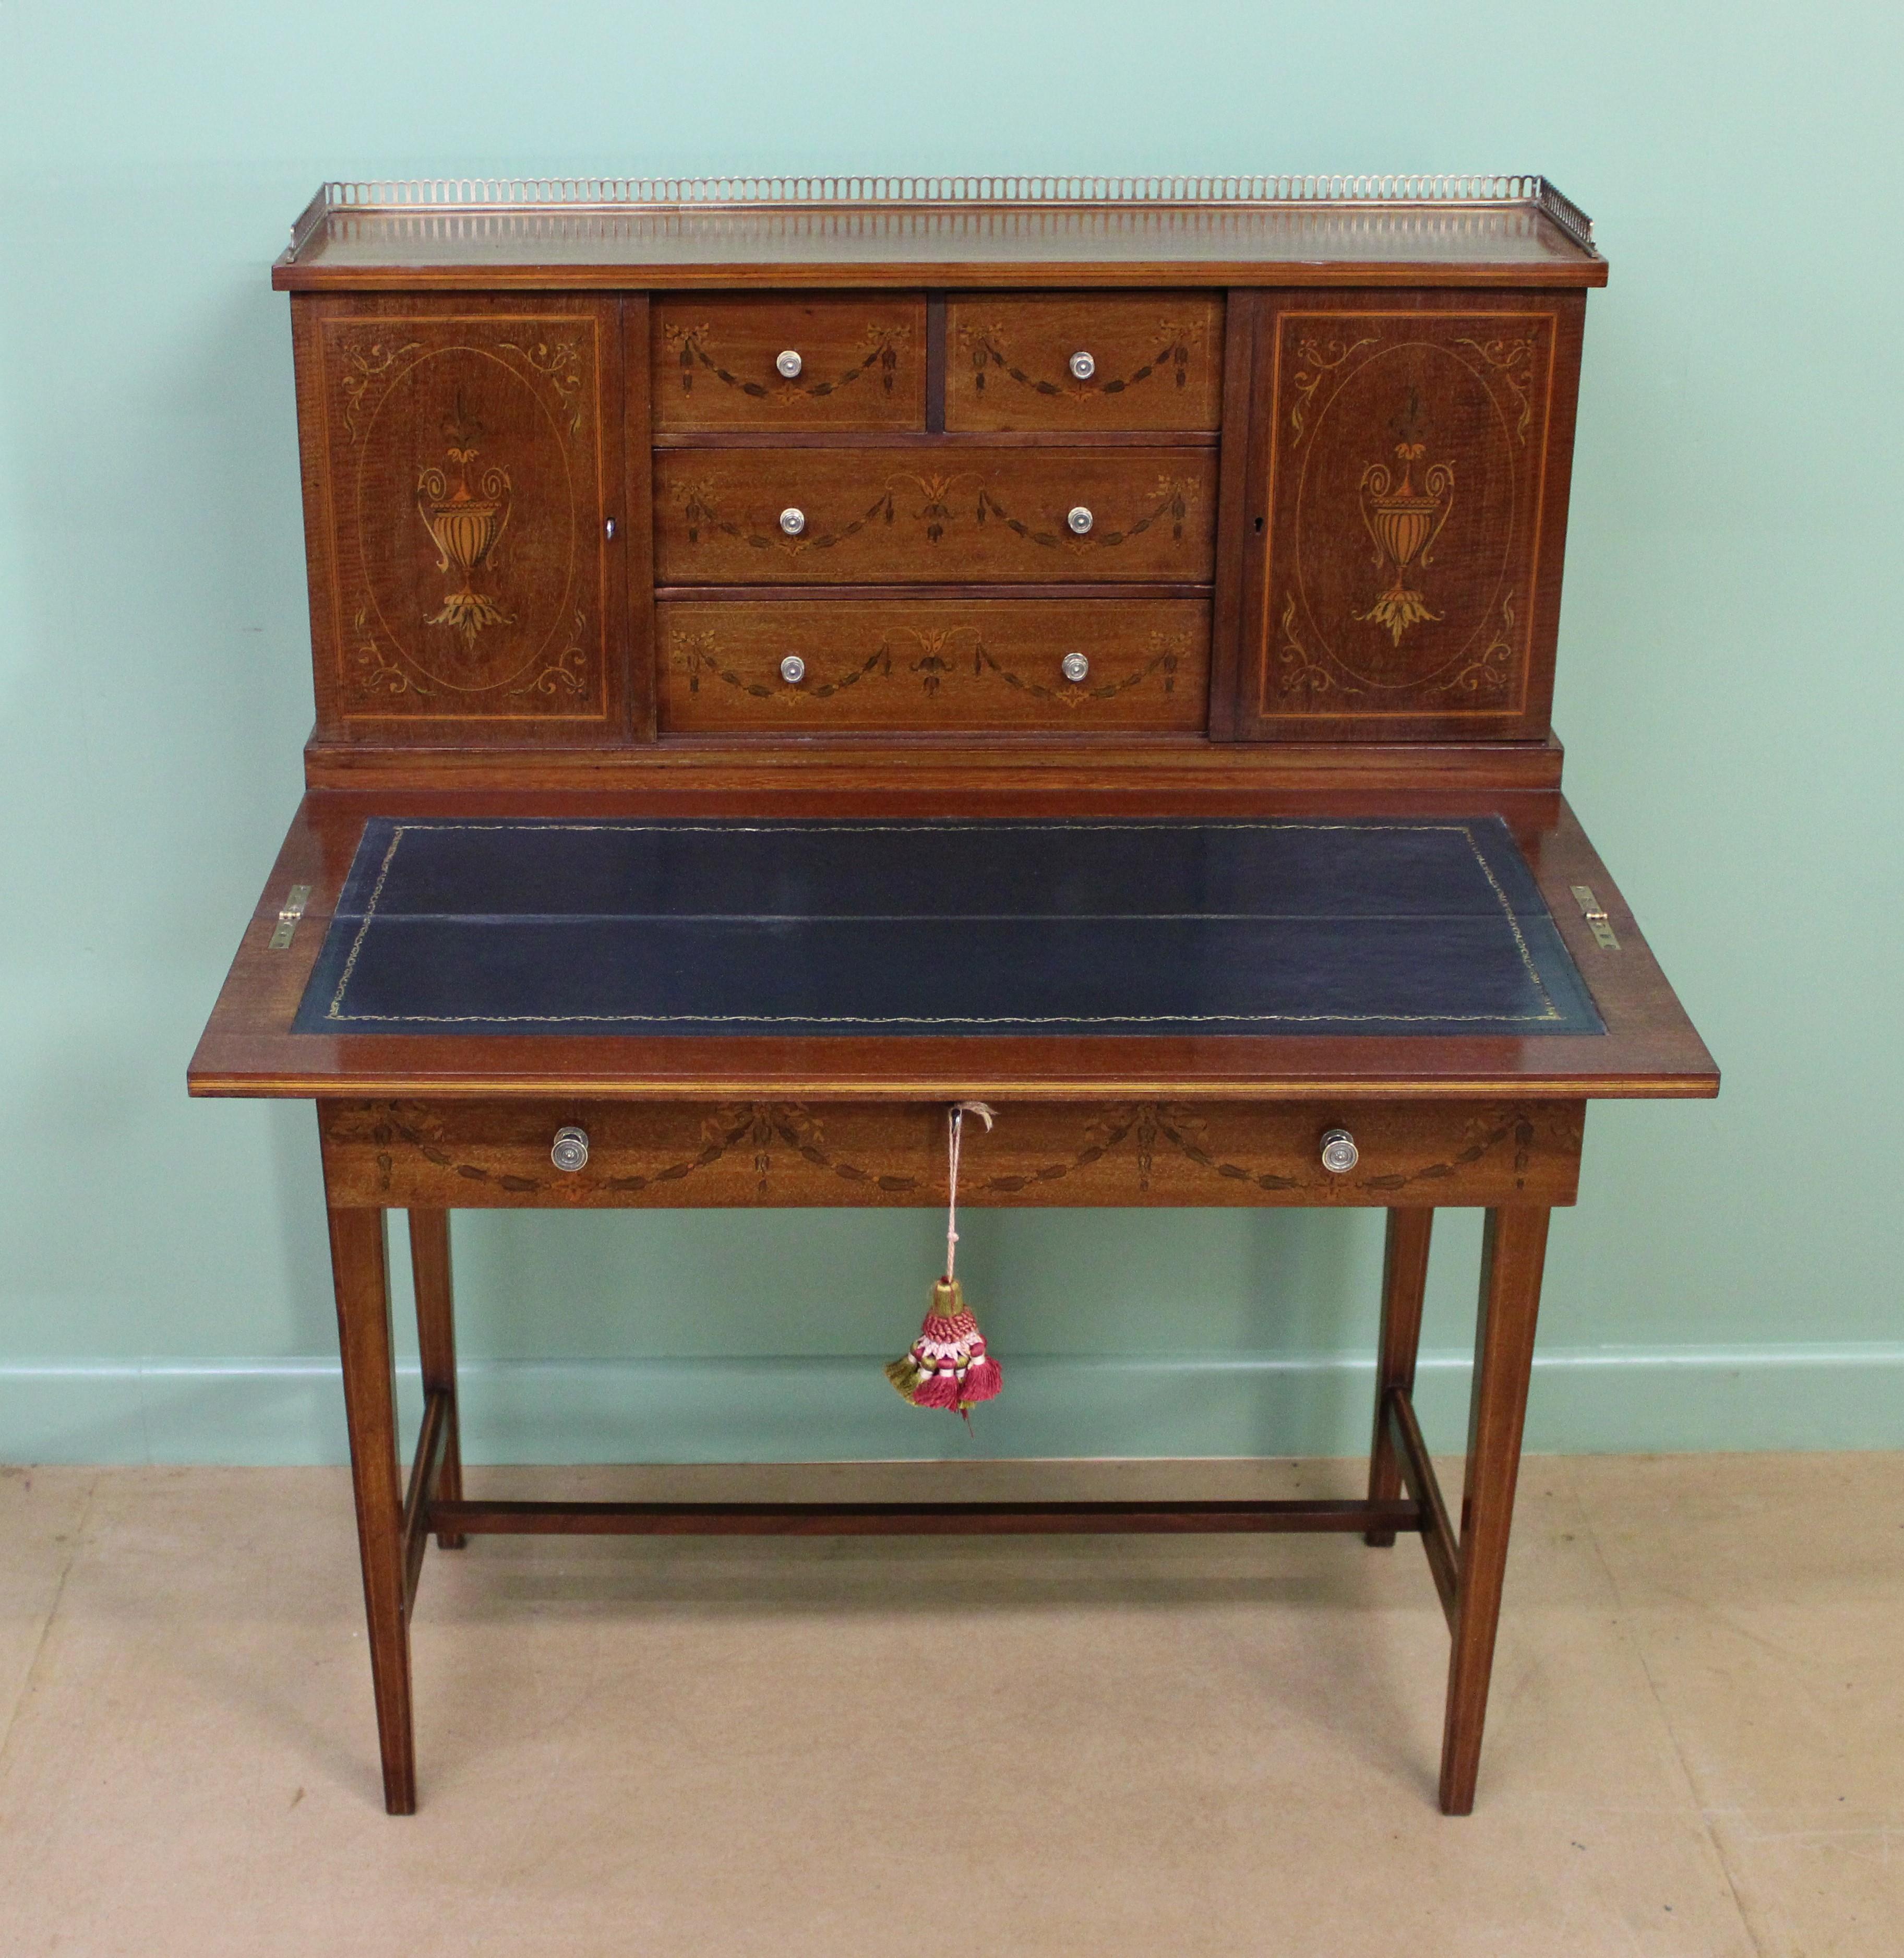 Late 19th Century Inlaid Mahogany Bonheur Du Jour by Jas Shoolbred & Co. For Sale 4